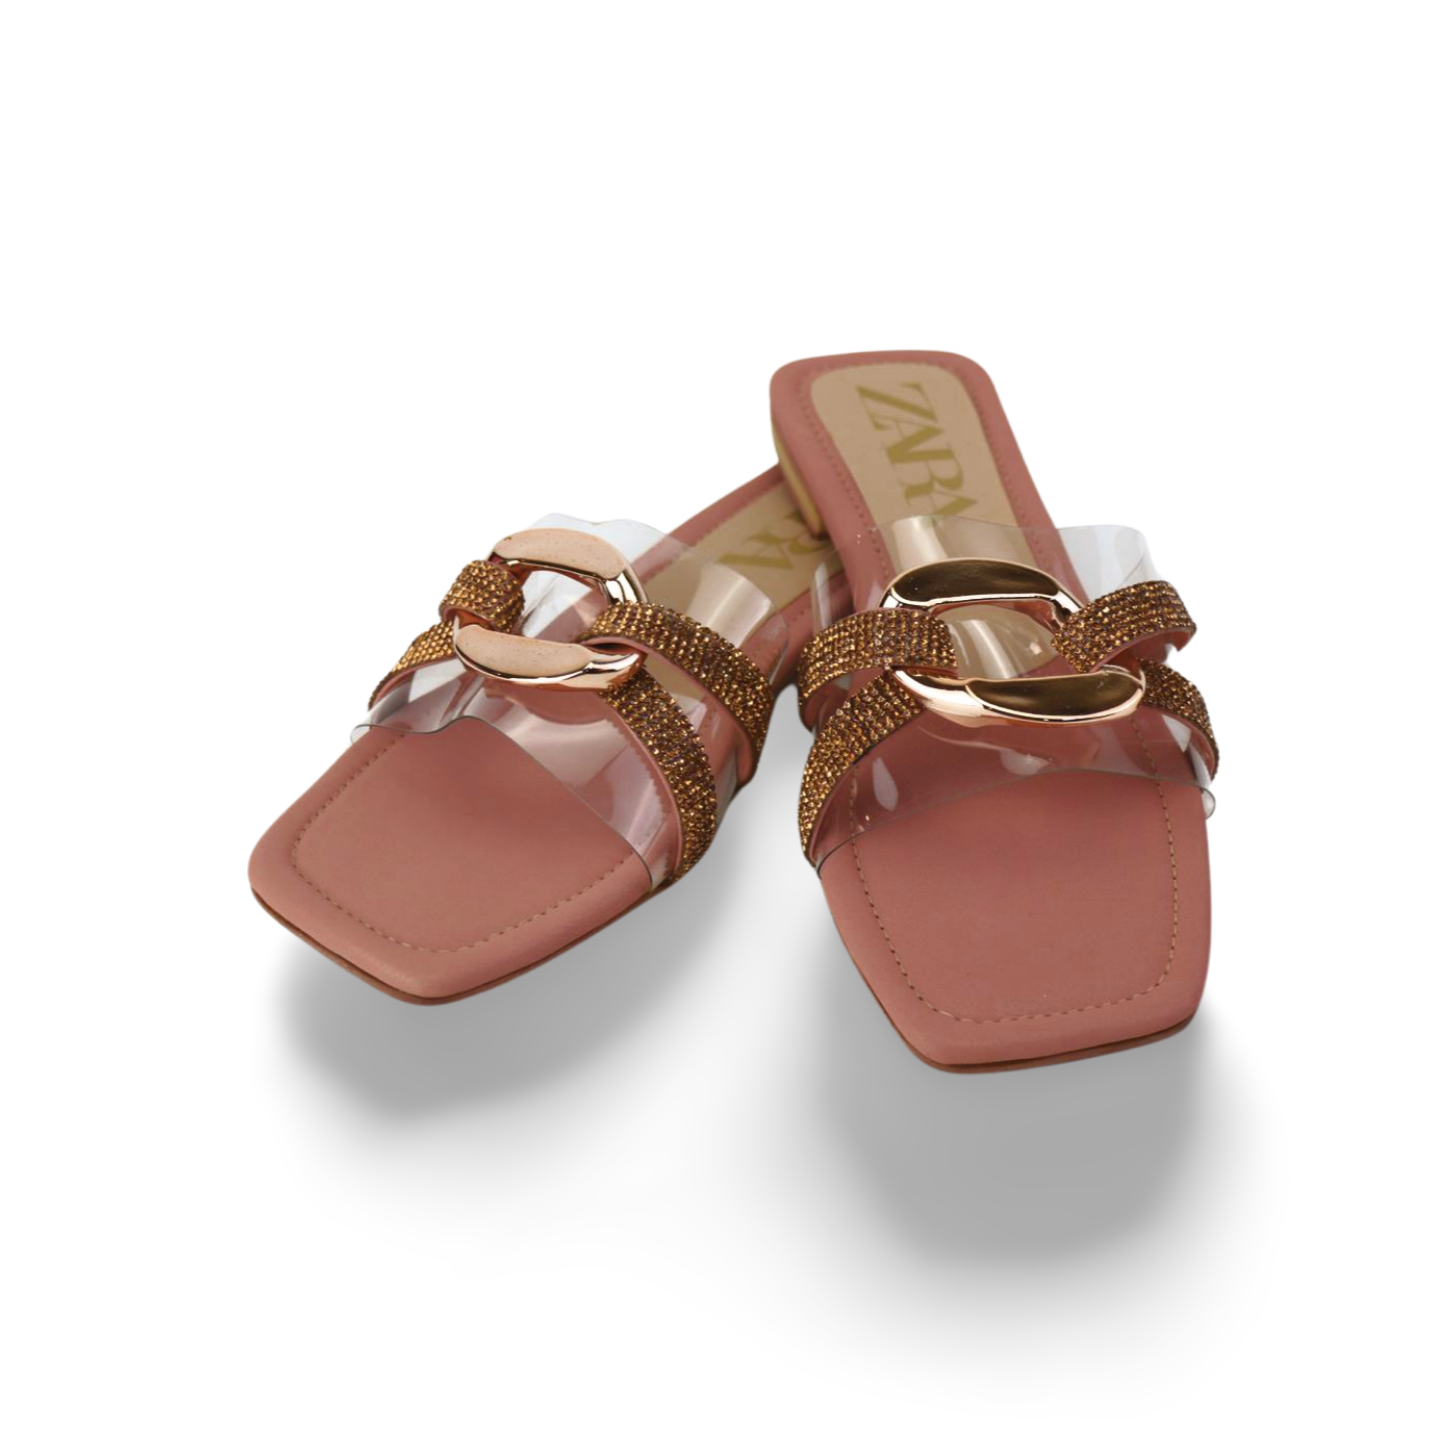 Women's Pink Flat Sandals with Clear Strap and Gold Chain Buckle